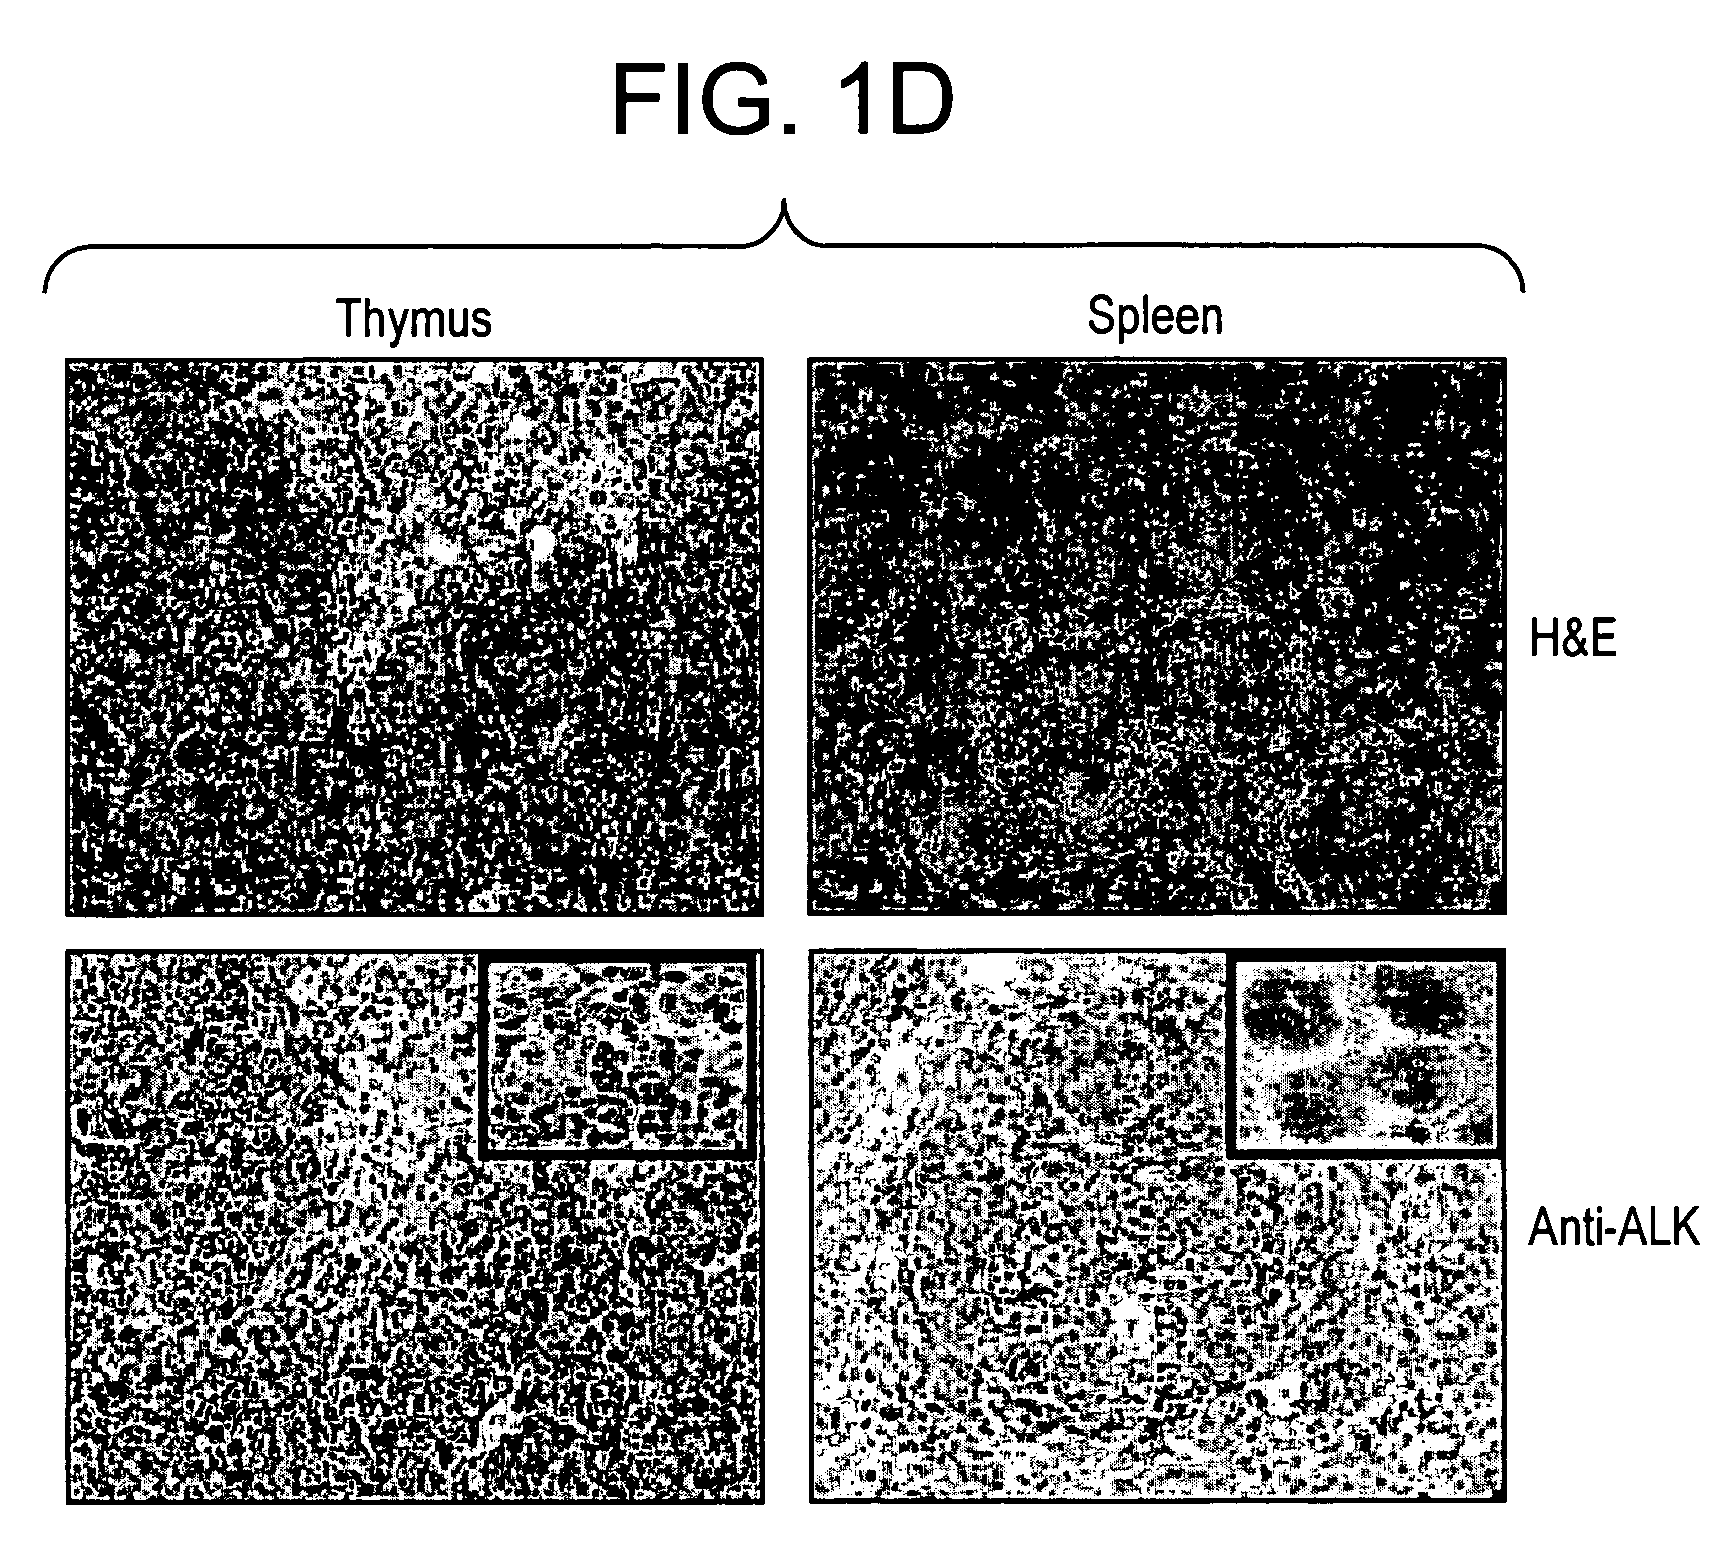 ALK protein tyrosine kinase, cells and methods embodying and using same